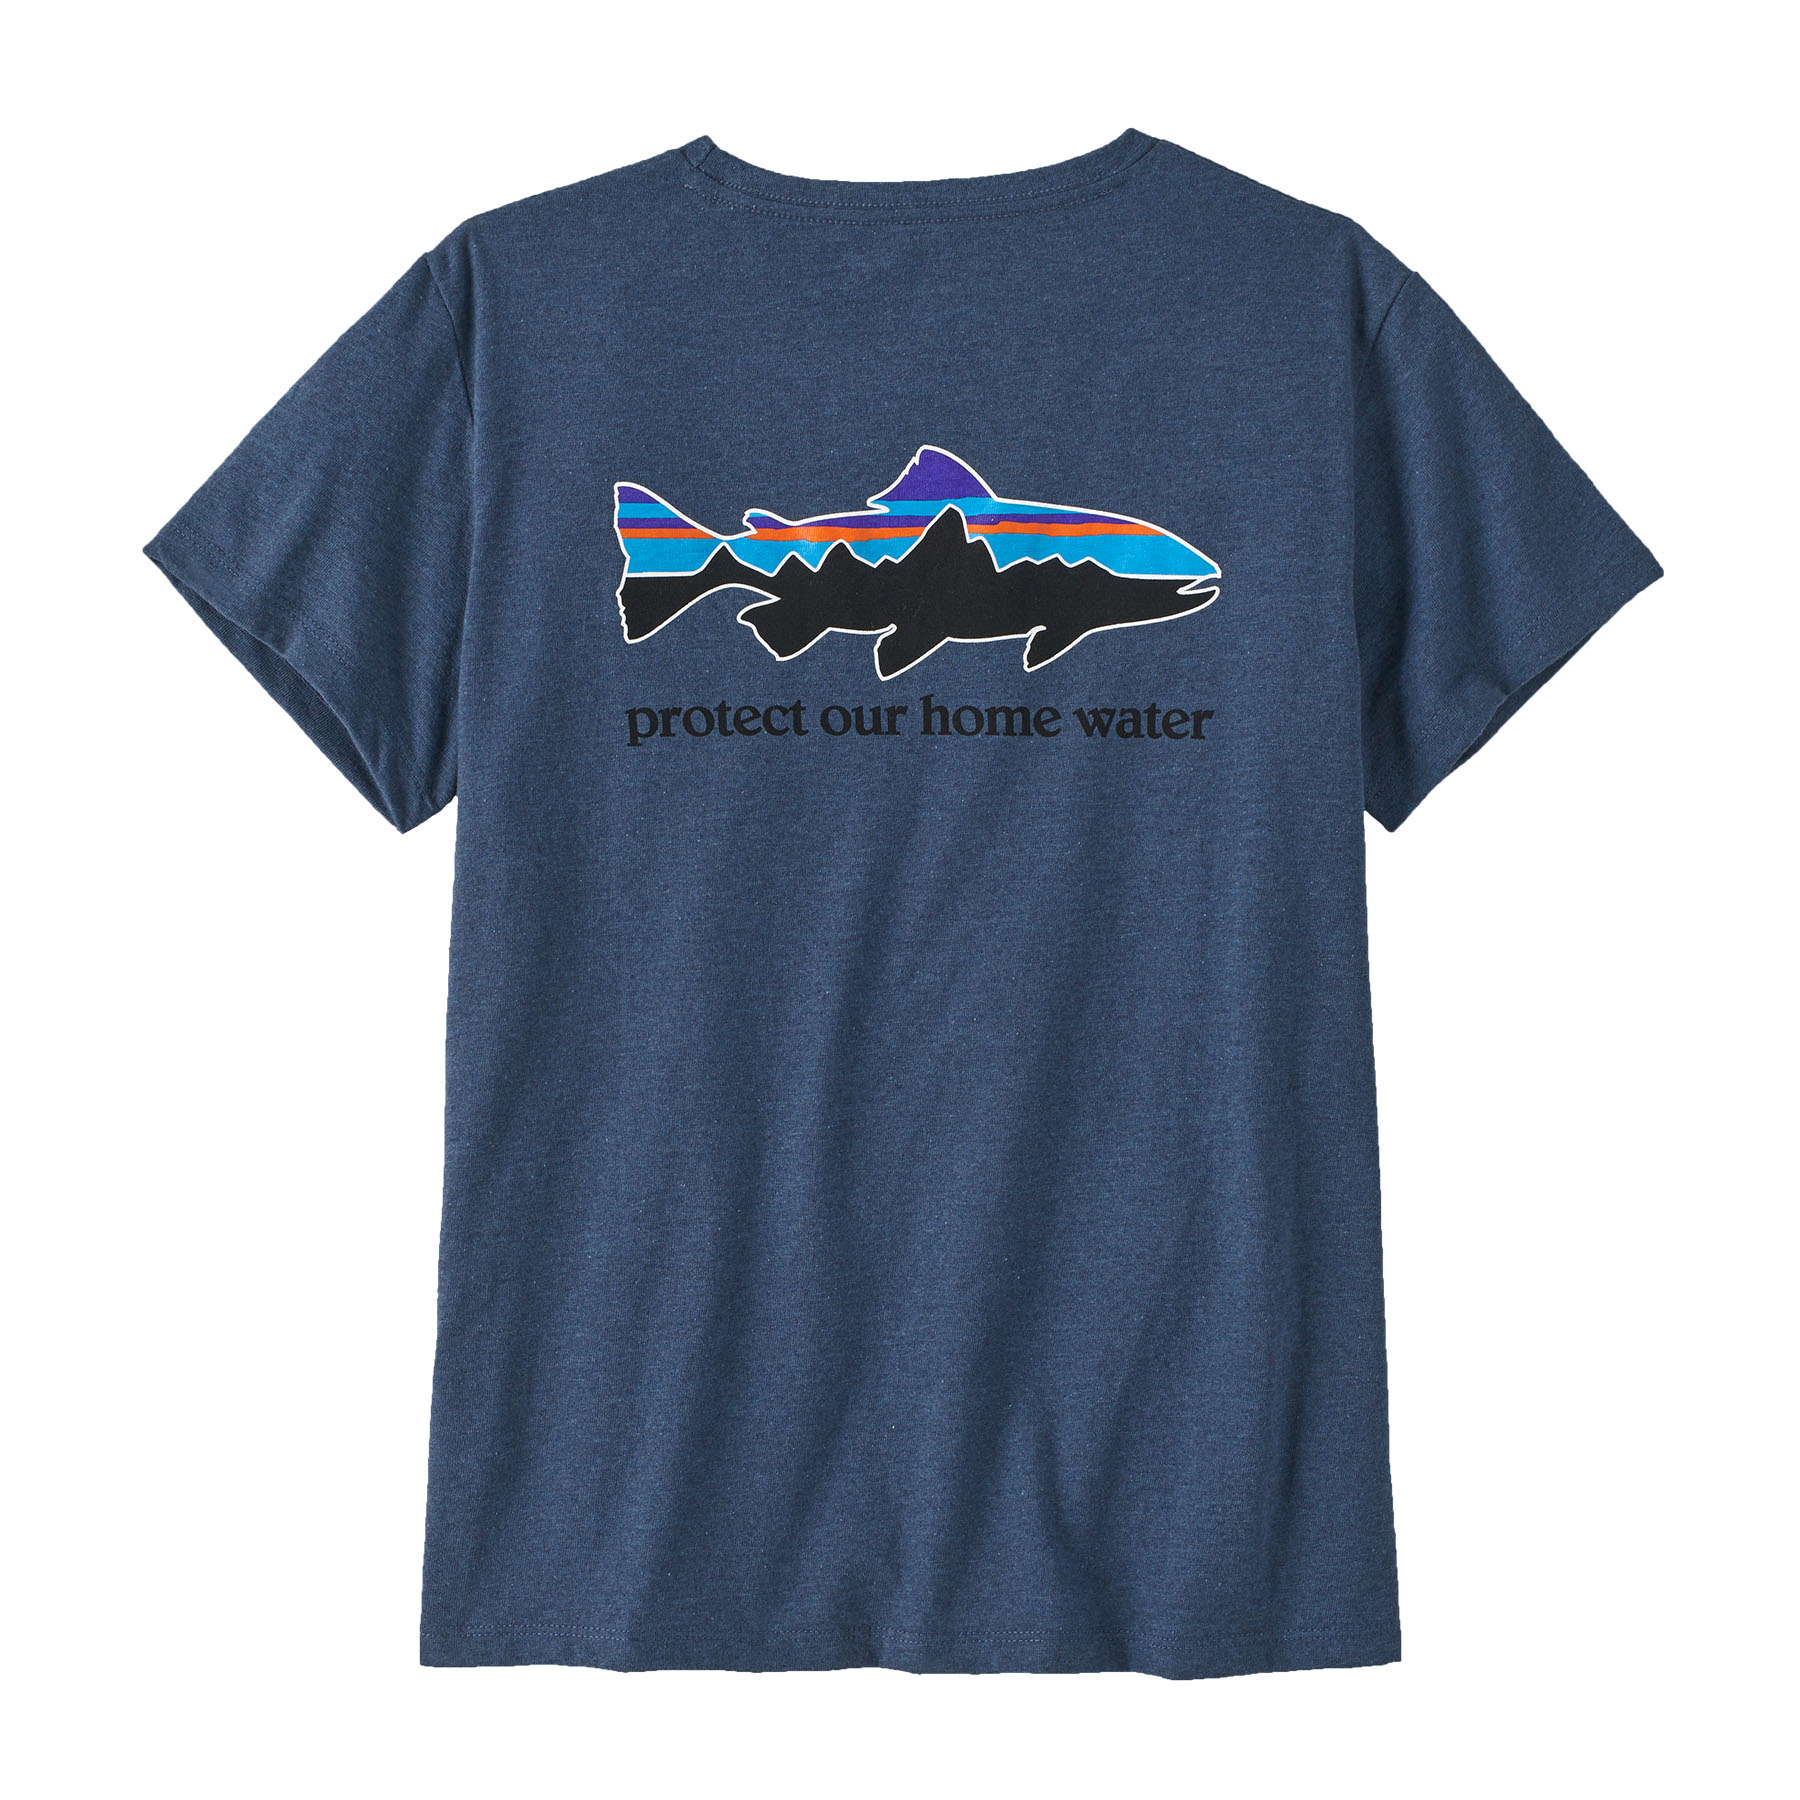 W's Home Water Trout Pocket Responsibili-Tee